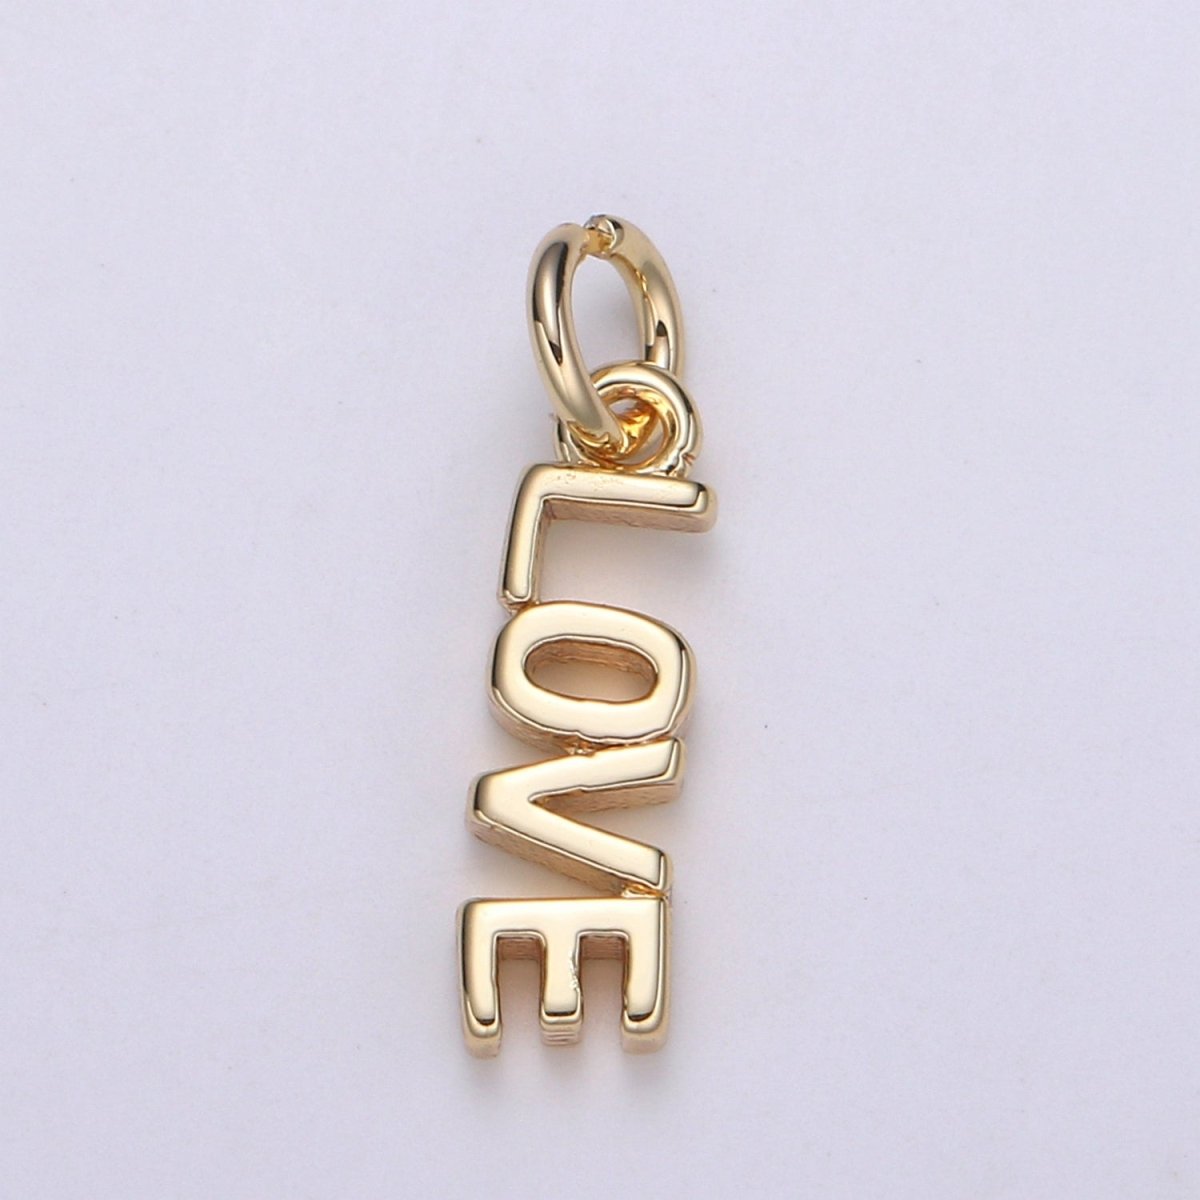 Dainty Love Charm 18k Gold Filled Love Script Words Charm for Bracelet Necklace Earring Component Diy Jewelry Making Supply E-141 - DLUXCA